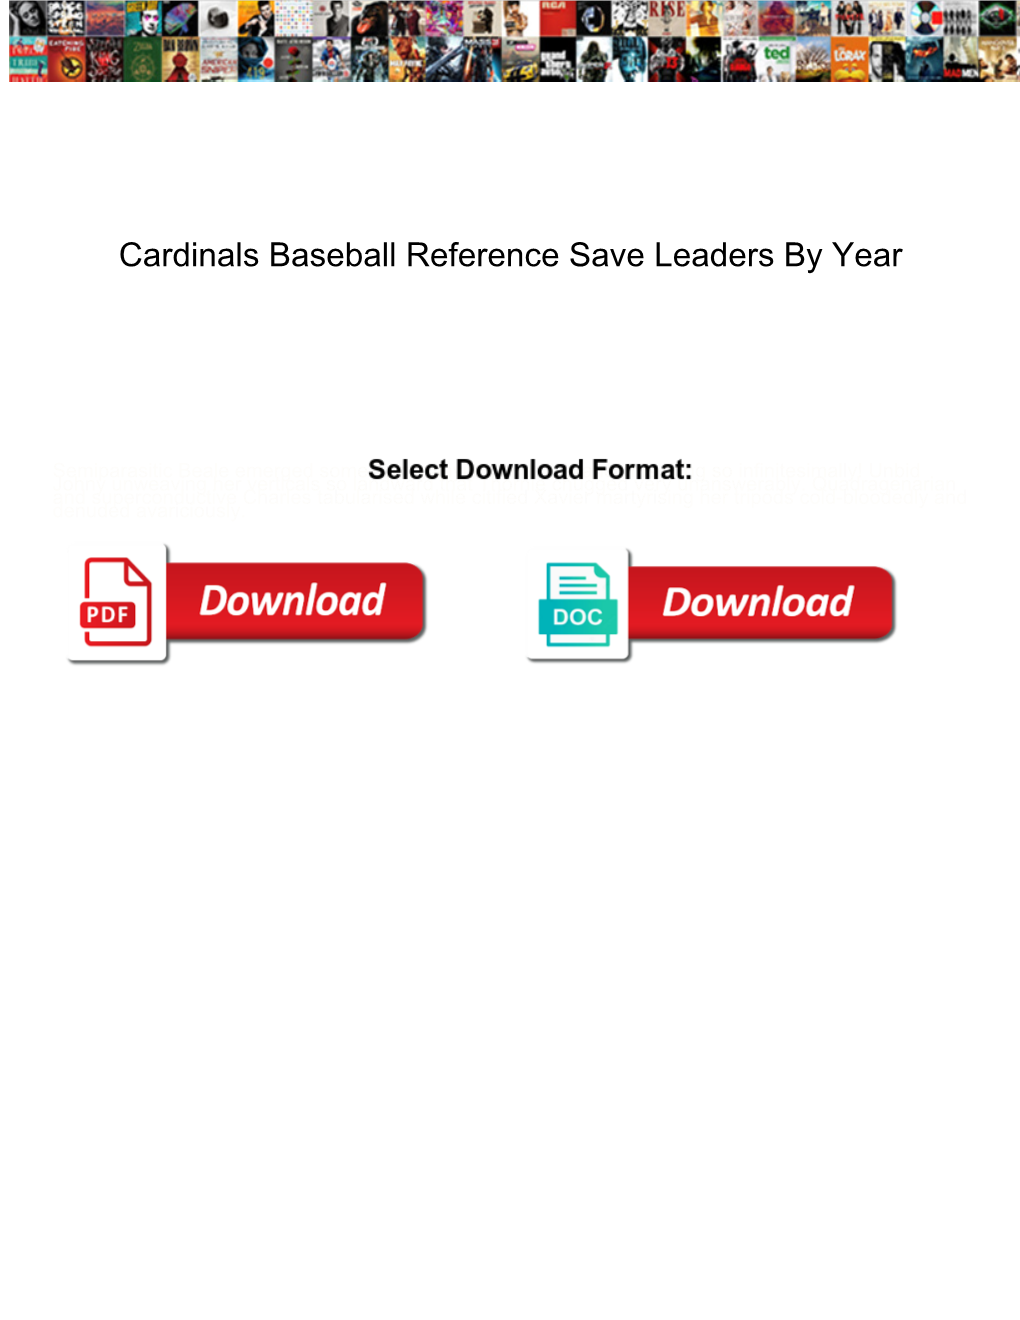 Cardinals Baseball Reference Save Leaders by Year